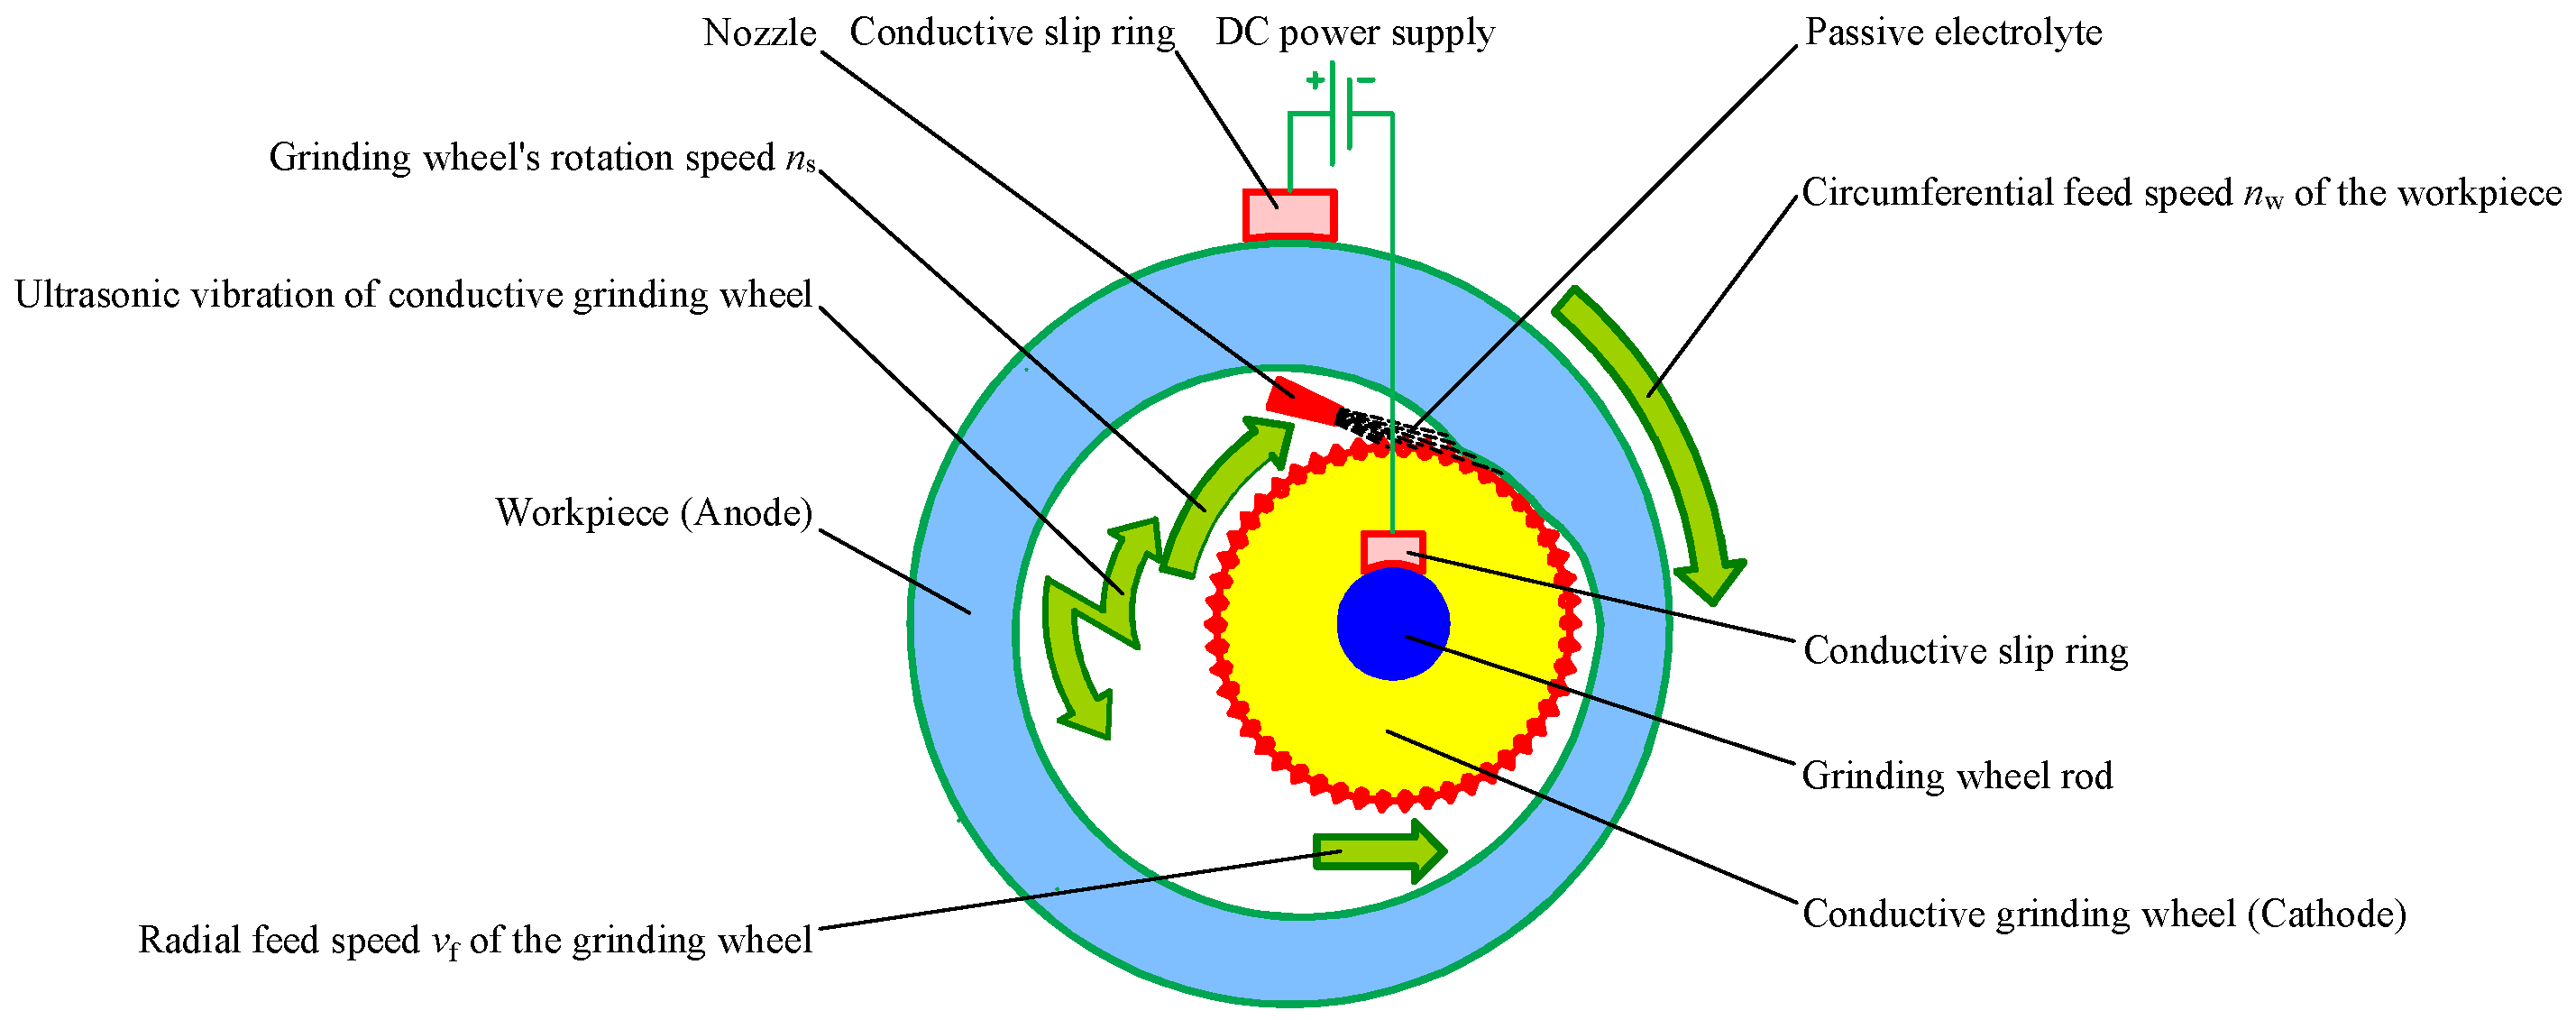 Analysis on the removal mechanism of disc grinding based on